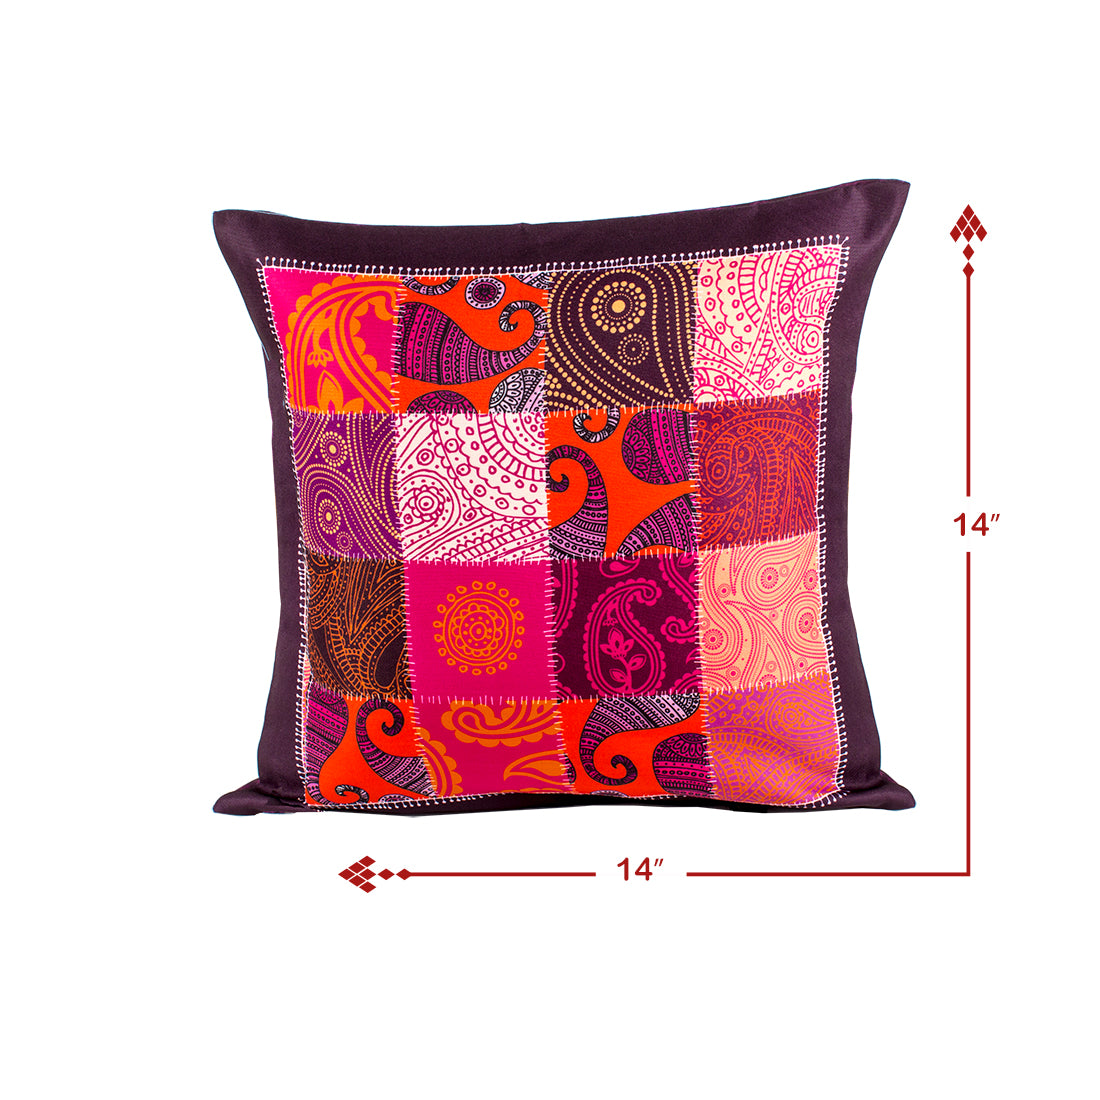 Cushion Cover-Ethnic Collection-55-Set of 2